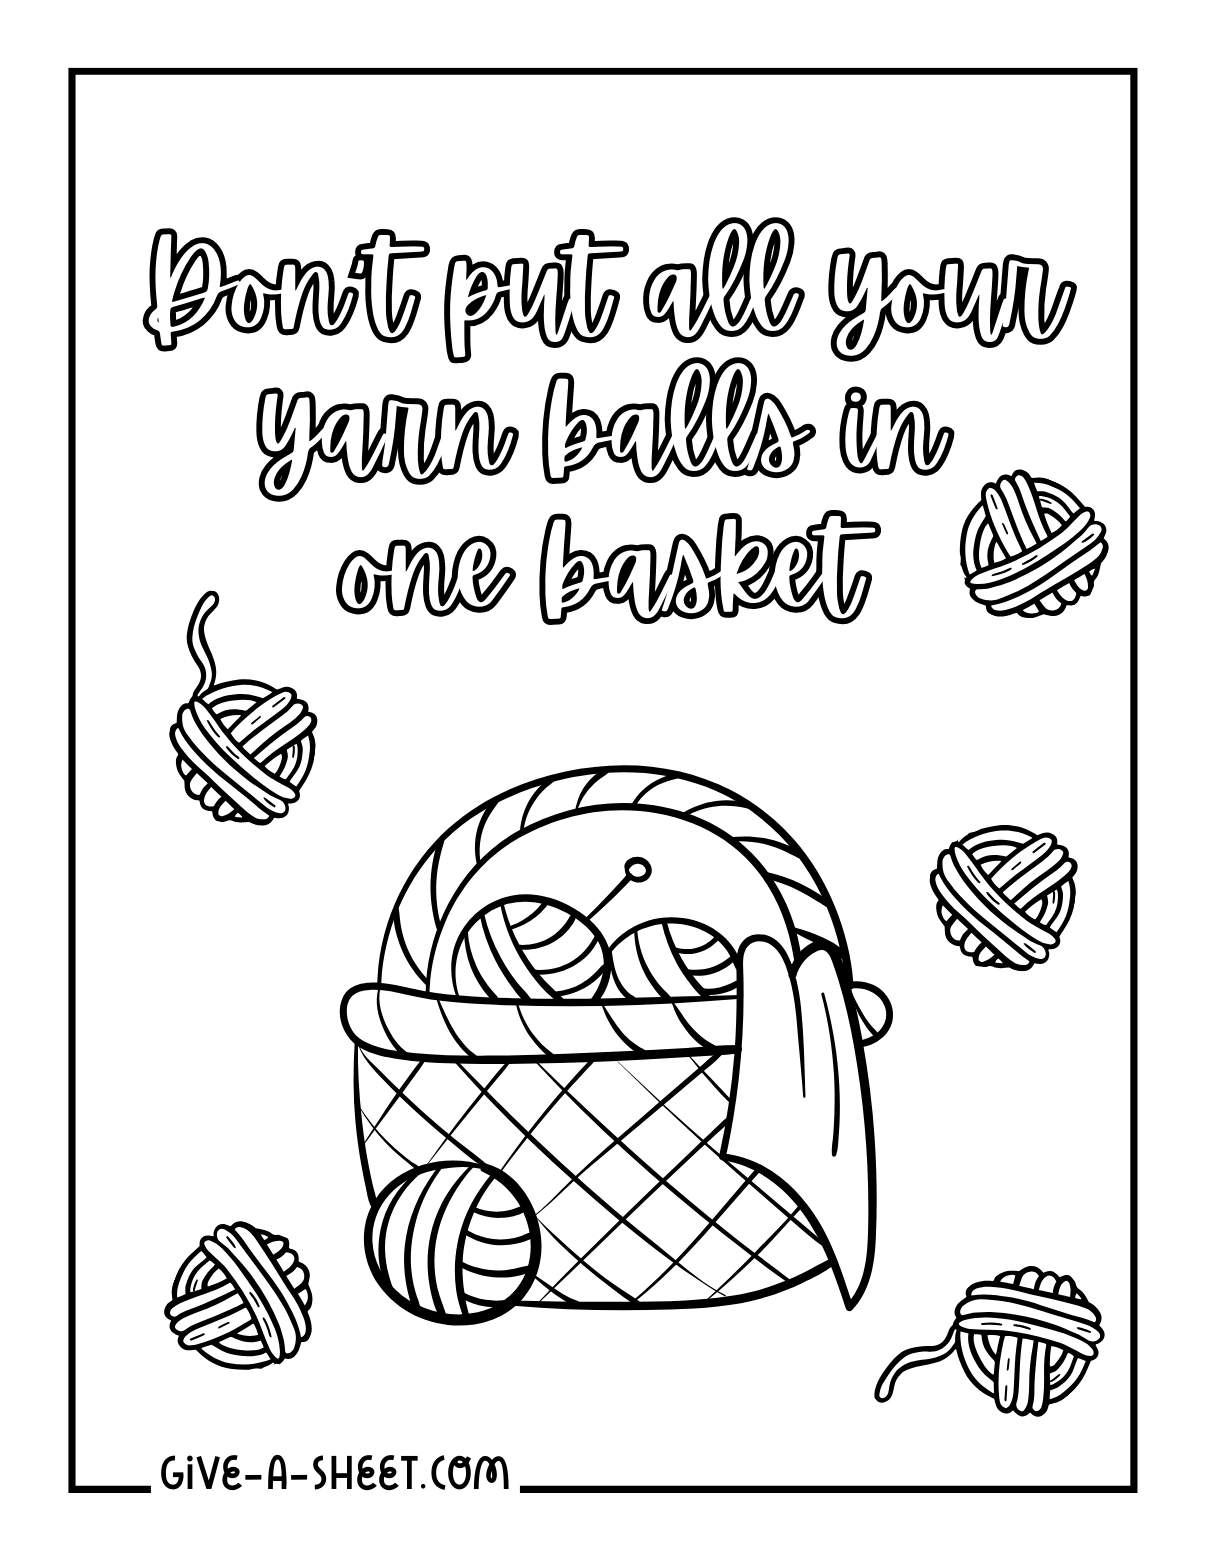 Crochet yarn skeins on a basket coloring page.